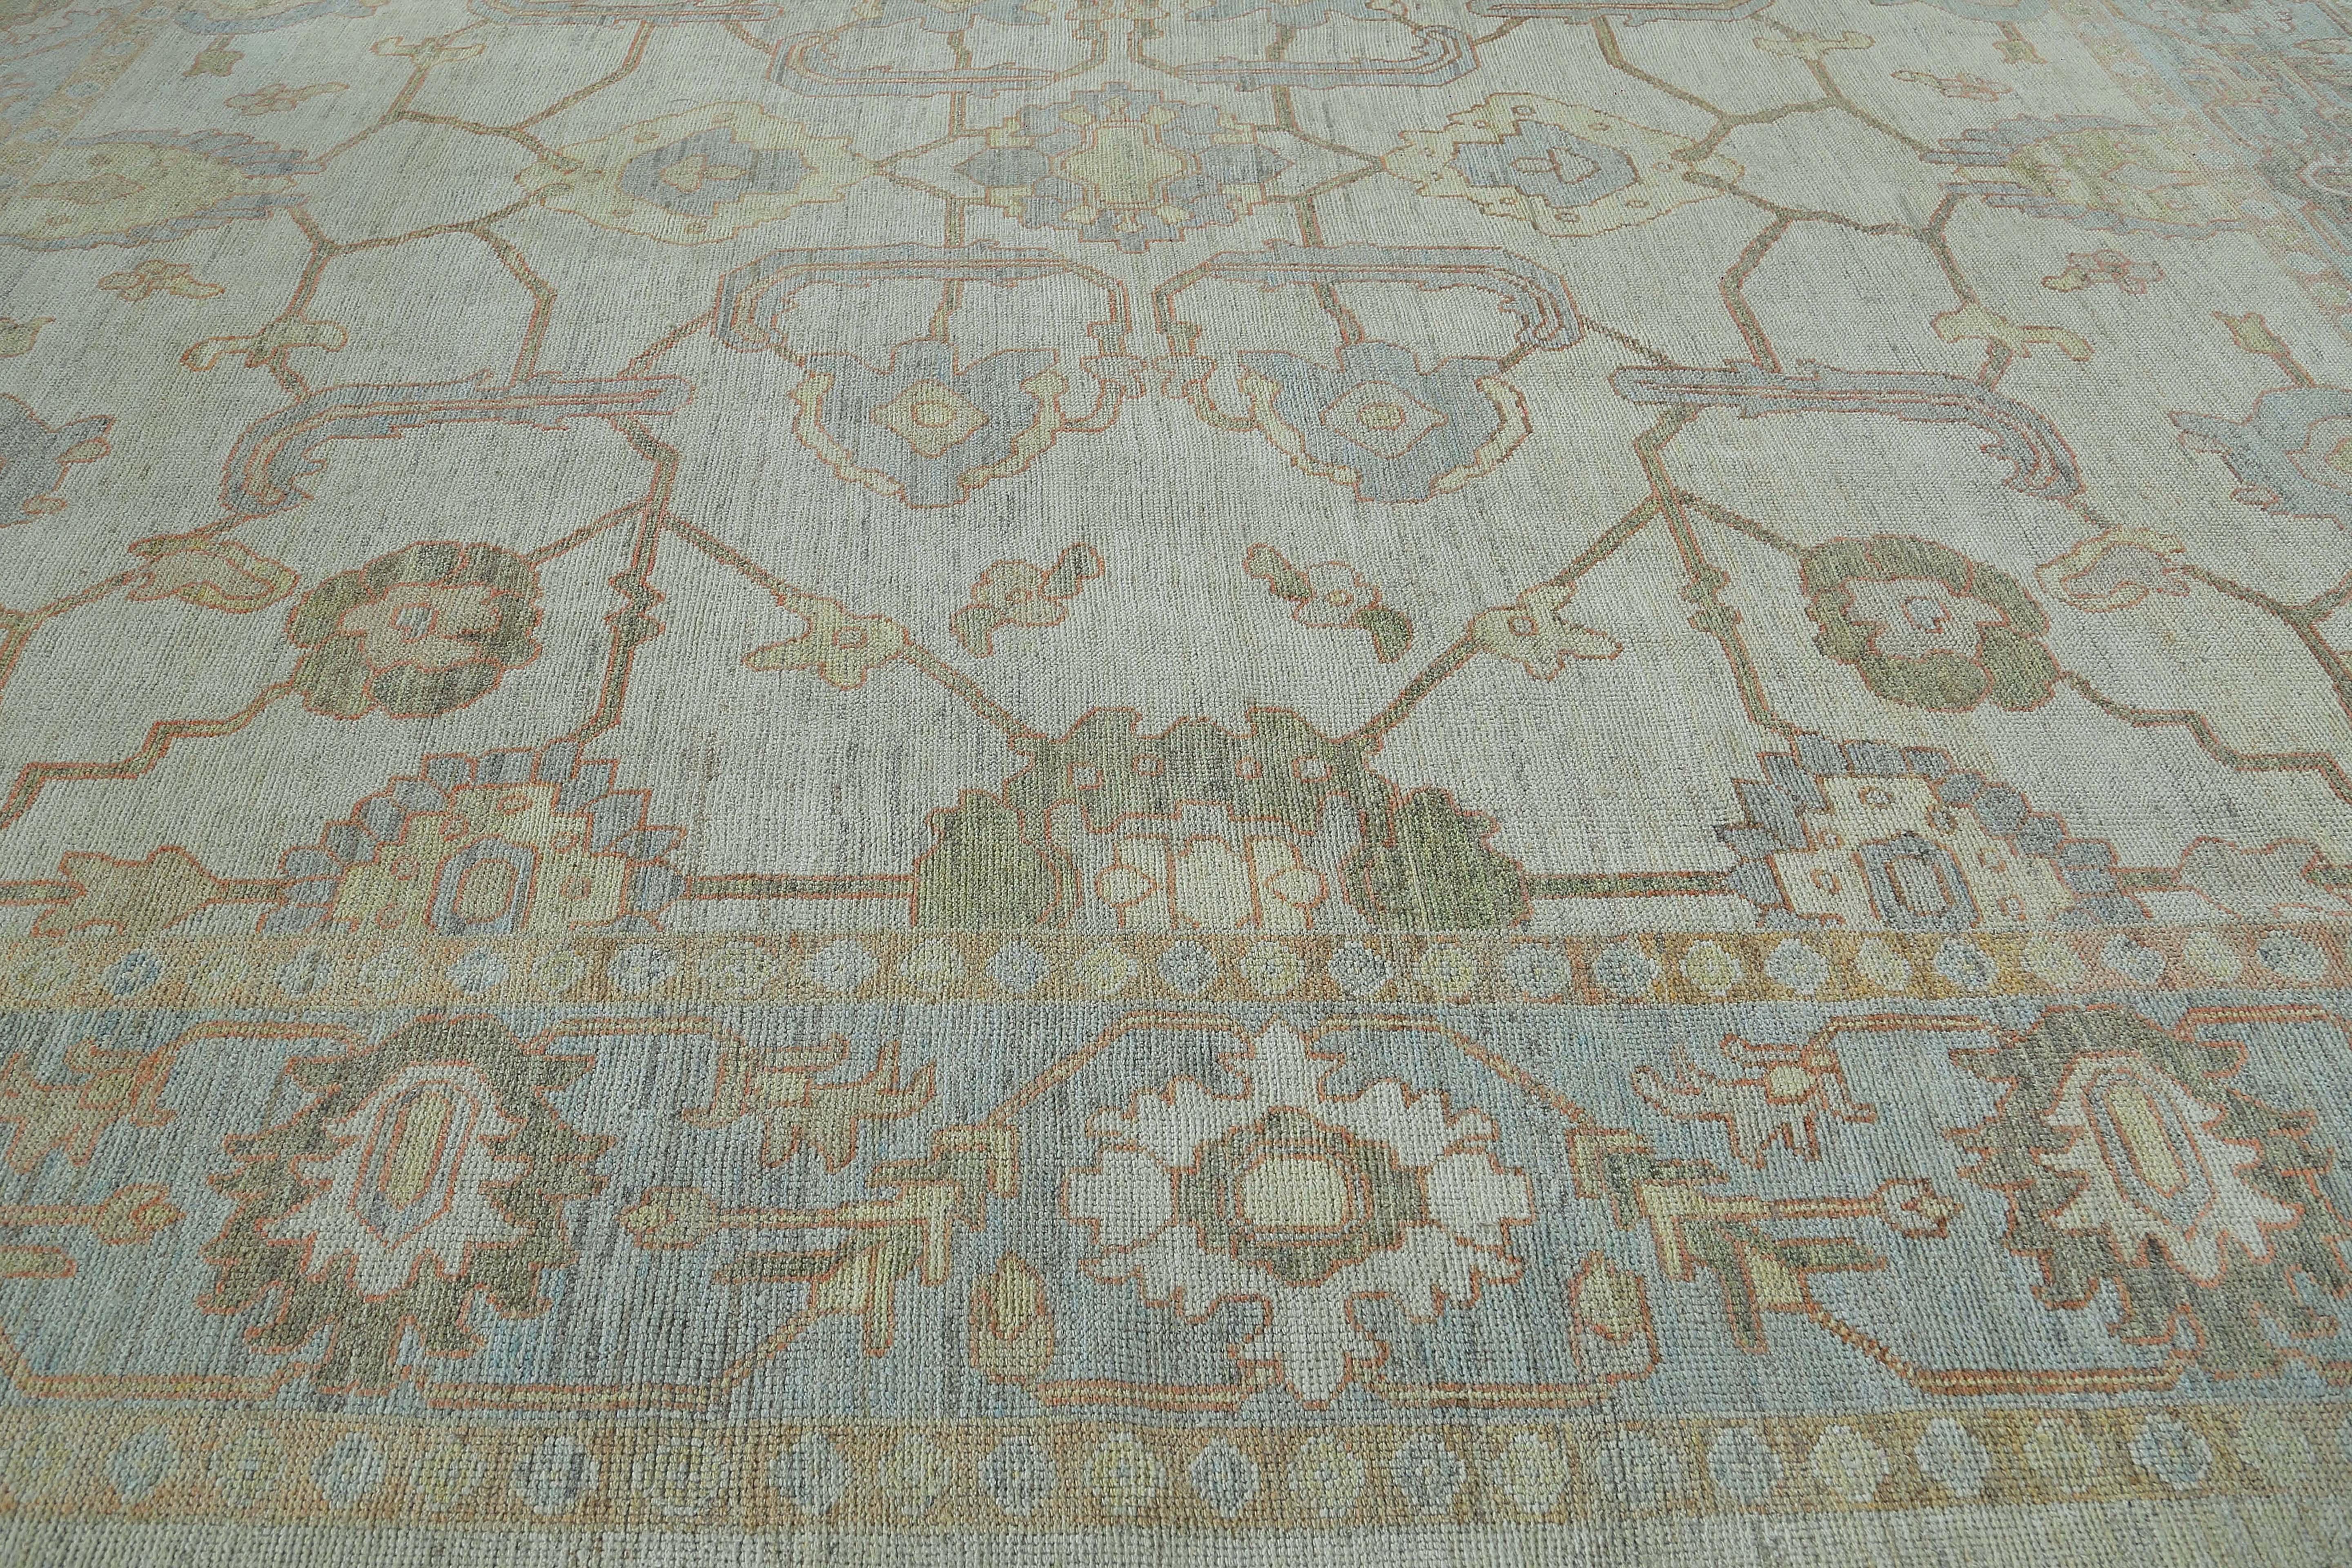 Contemporary Exquisite Turkish Oushak Rug For Sale